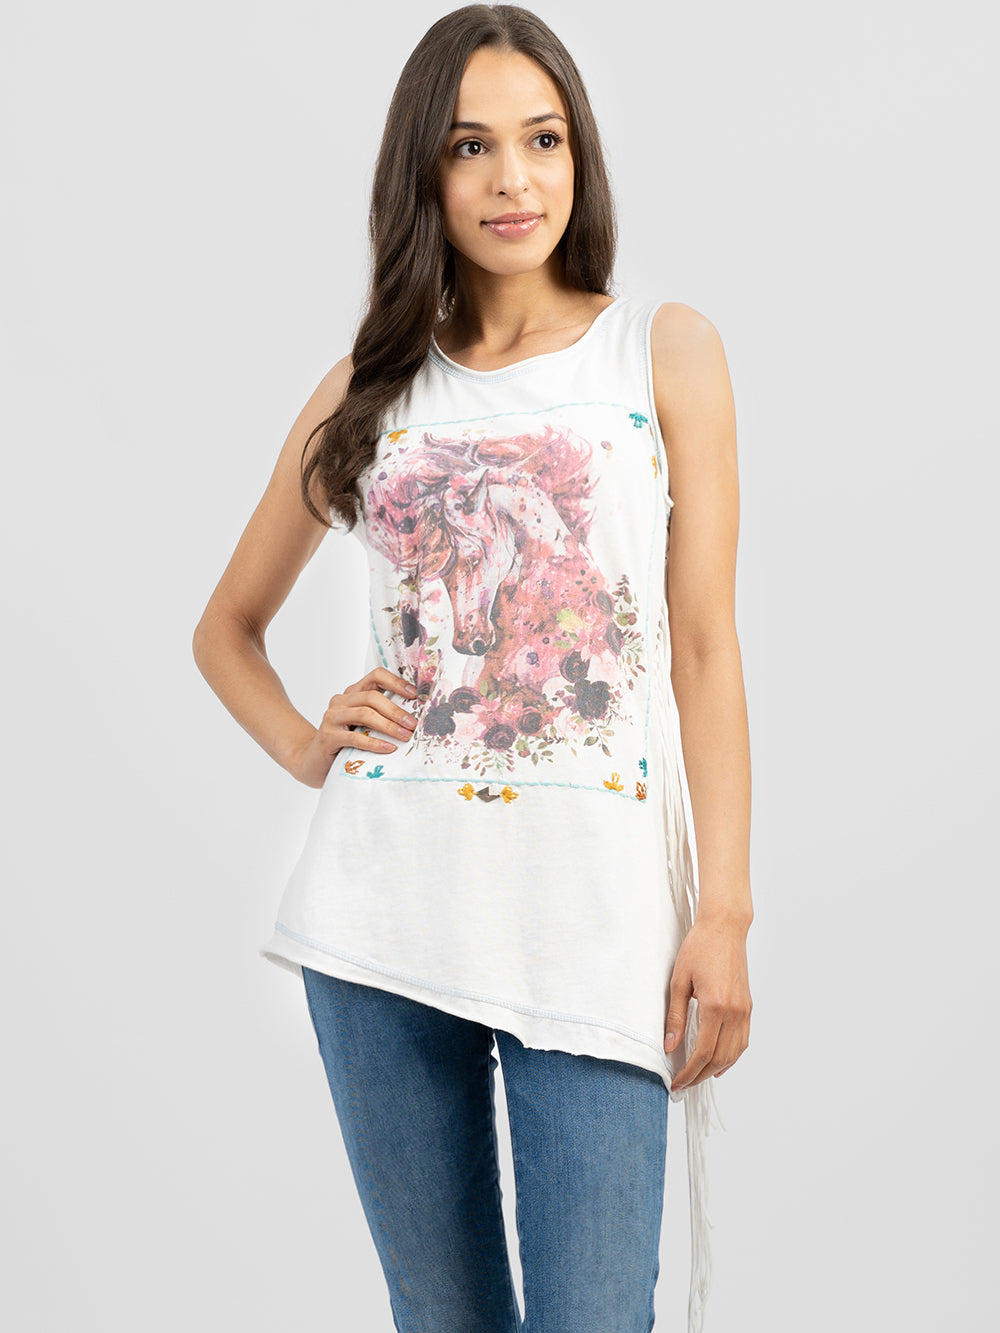 Women's Mineral Wash Hand Stitching Floral Horse Graphic Tassel Sleeveless Tee - Cowgirl Wear